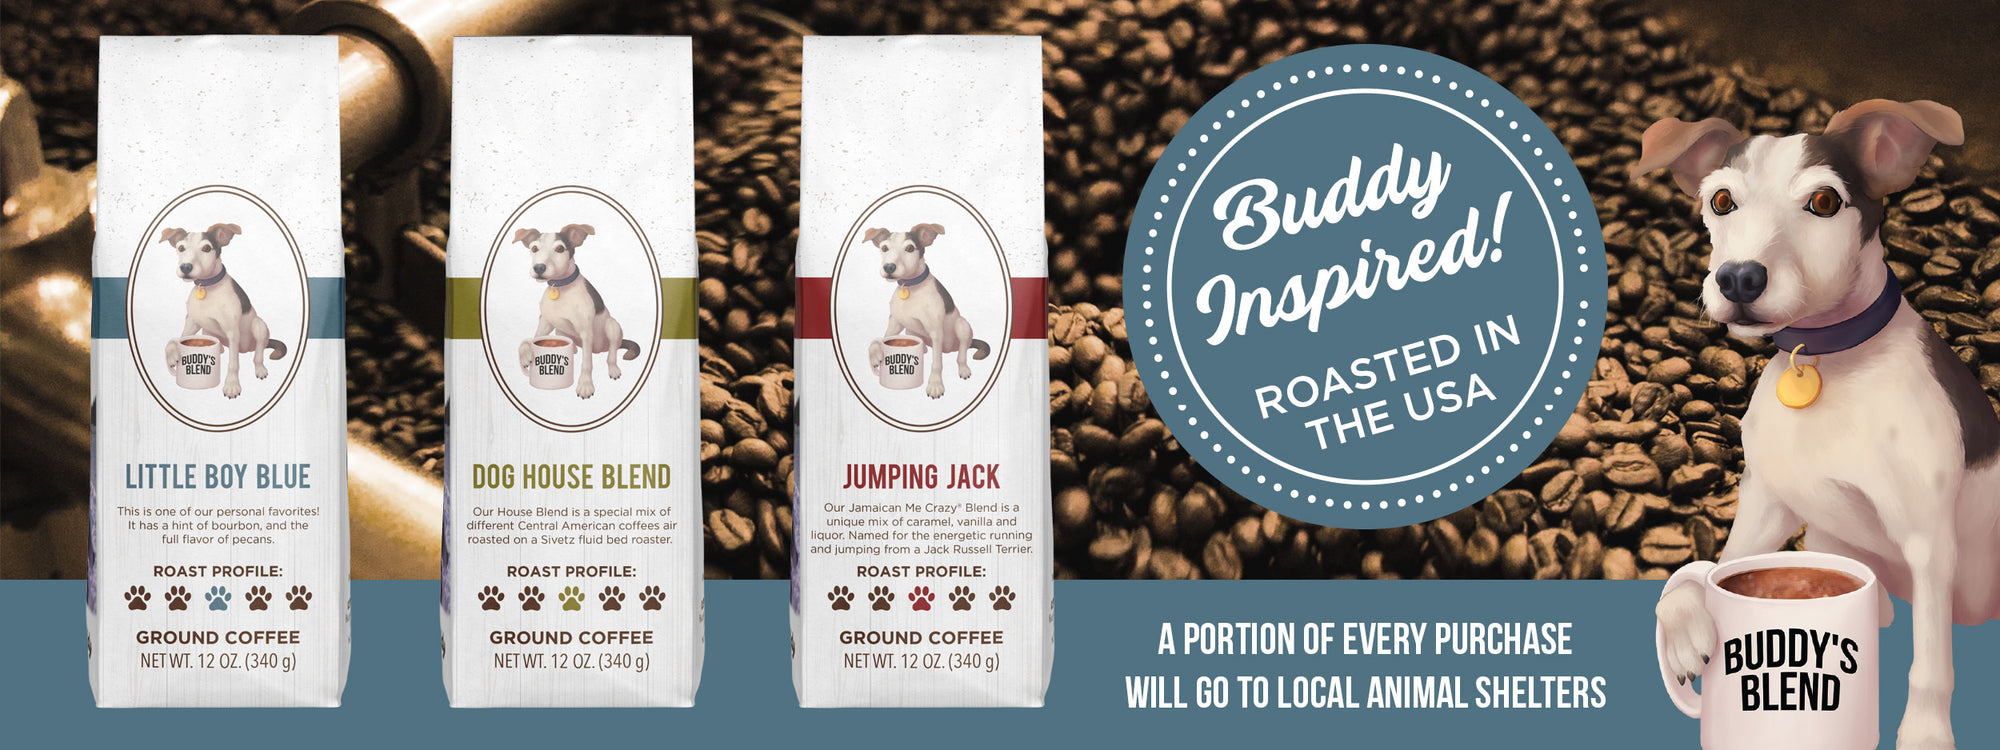 Buddy's Blend Coffee donates 50% of profit to animal shelters and rescues. We also support the aspca  and all of their efforts. Try our delicious coffee , we bet you'll like it. We love our dog's. Buddy's Blend Coffee. Drink a cup and save a pet